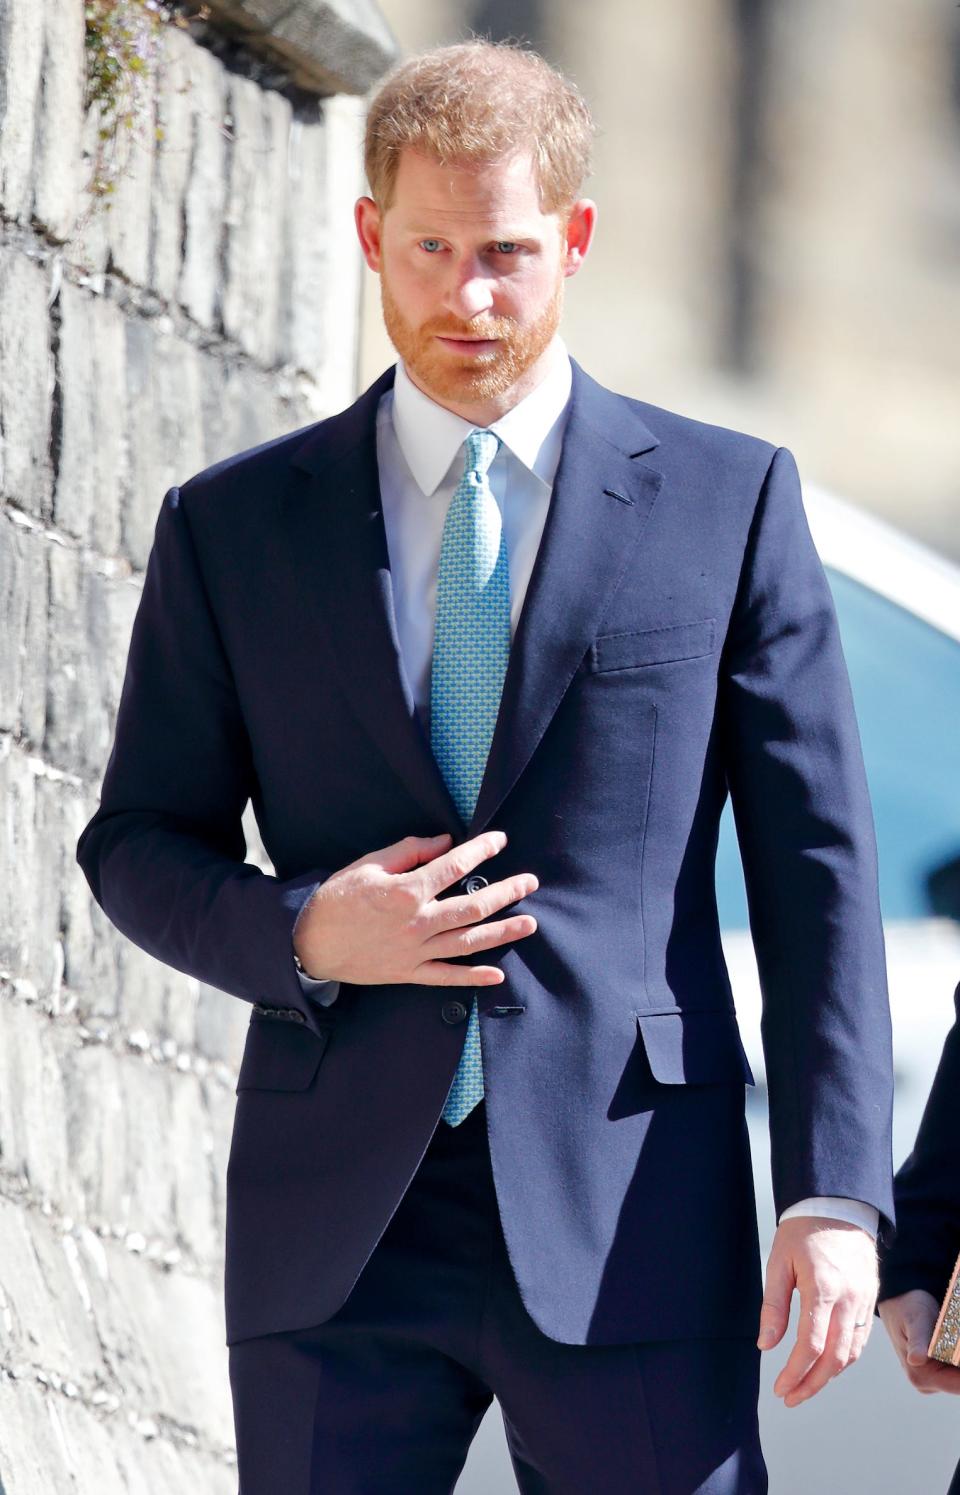 Prince Harry, Duke of Sussex attends the traditional Easter Sunday church service at St George's Chapel, Windsor Castle on April 21, 2019